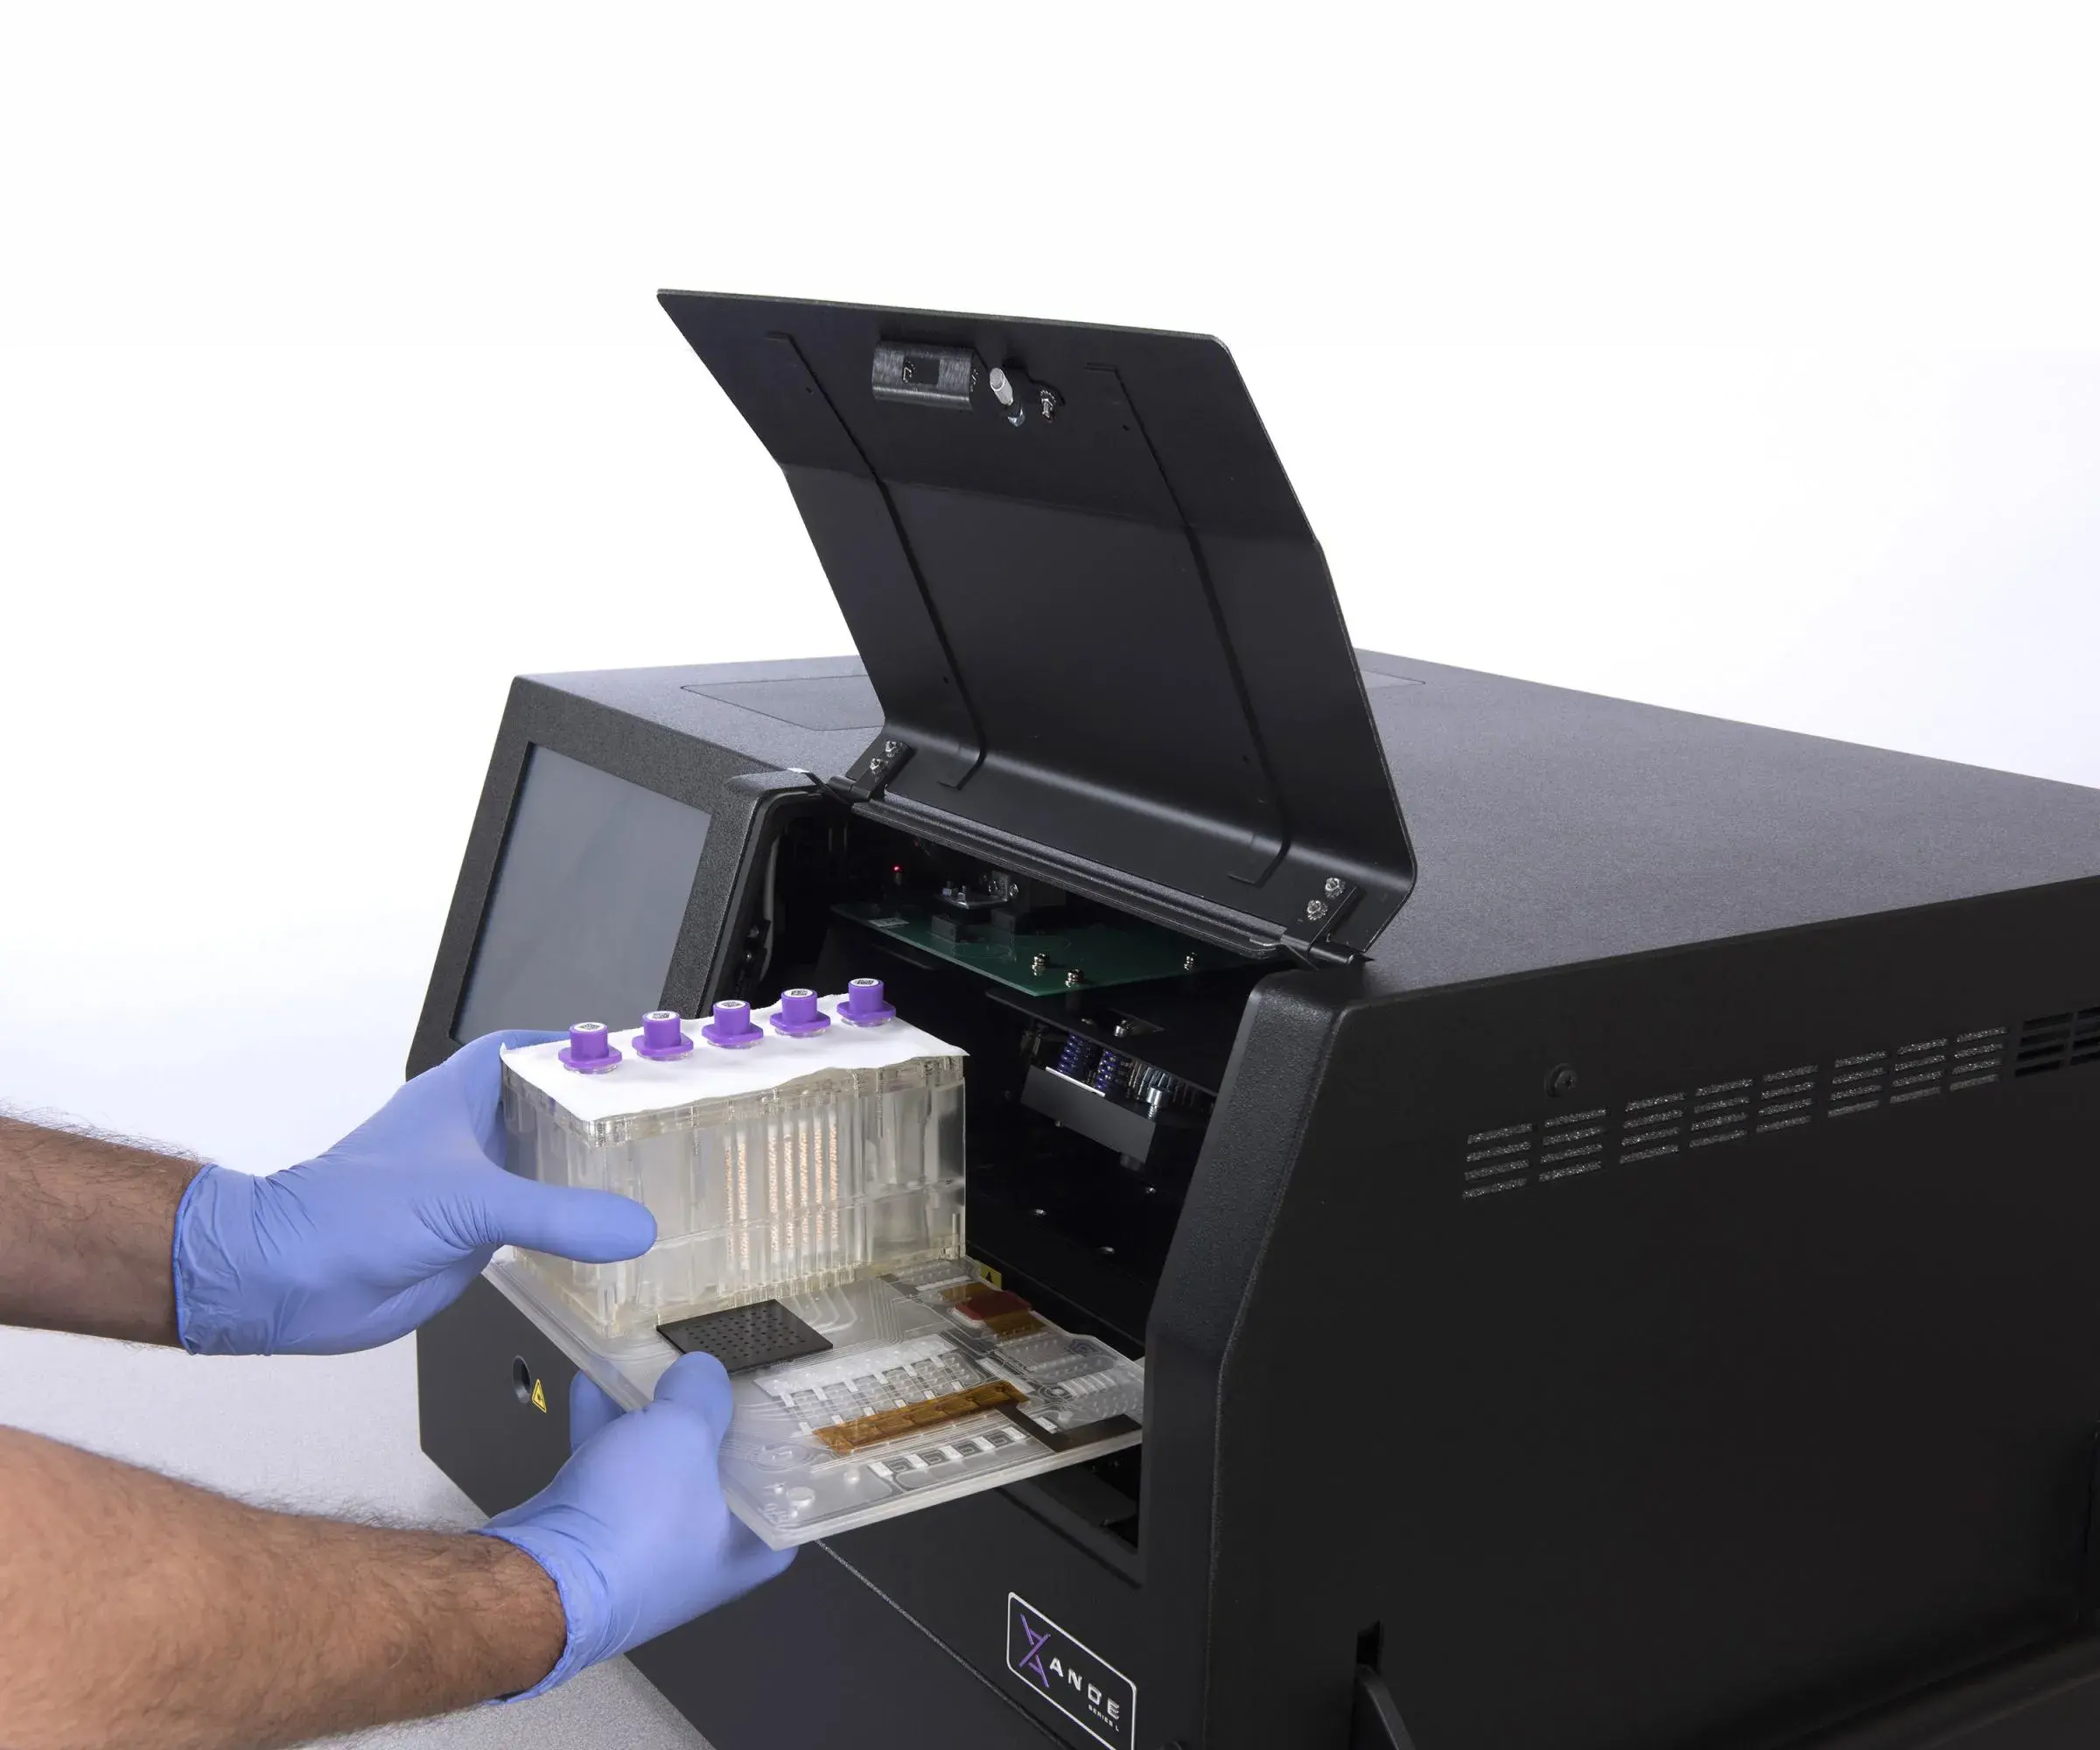 ANDE’s Rapid DNA machine can analyze five DNA samples at a time. Here the BioChip with test tubes is being inserted. Image by ANDE Corporation.